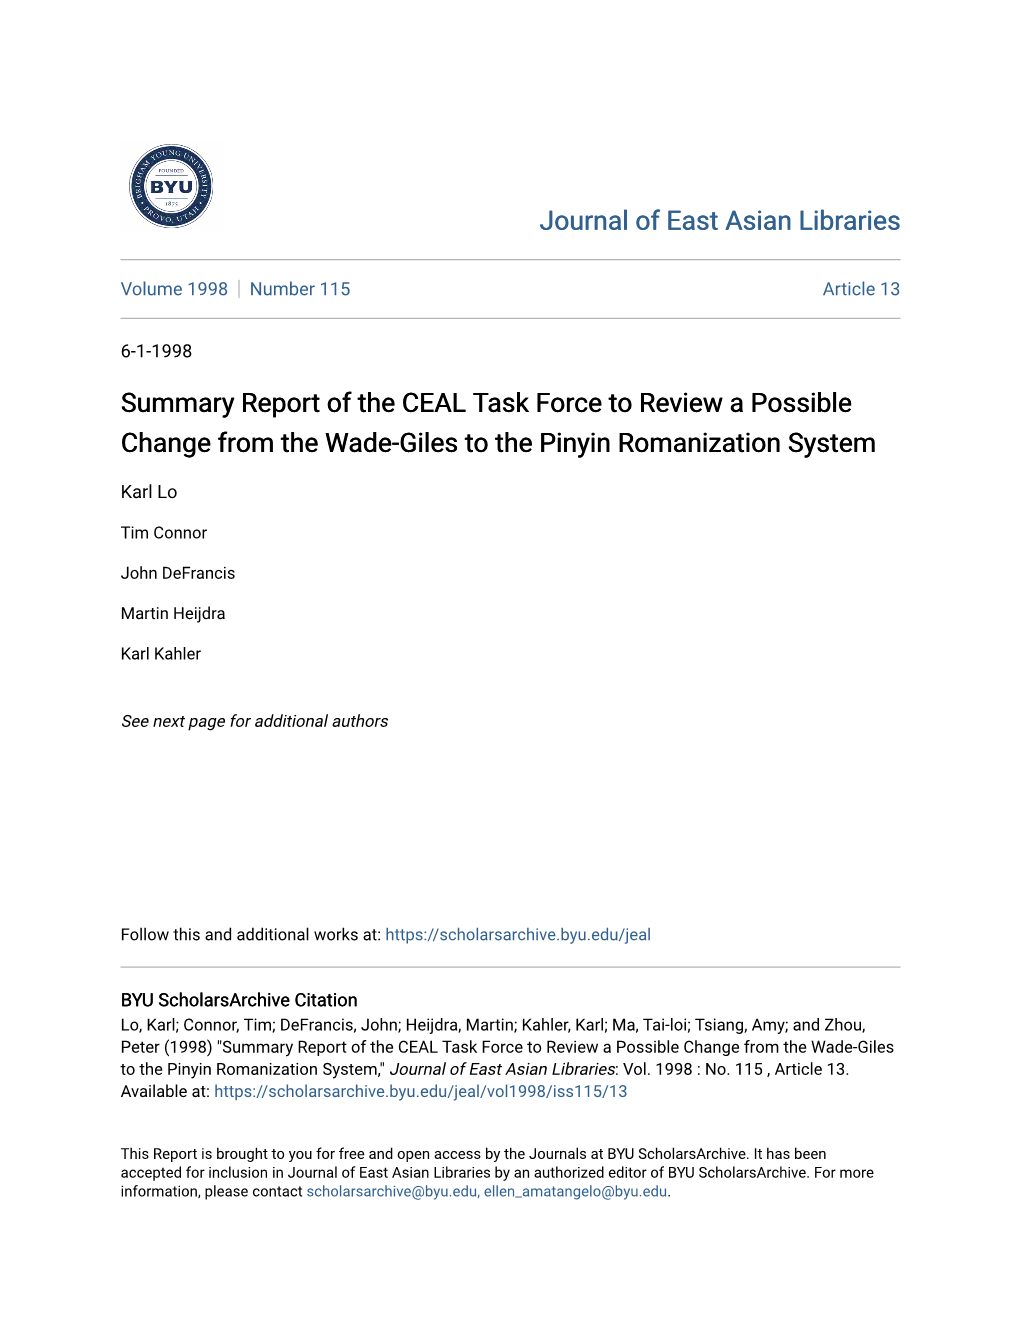 Summary Report of the CEAL Task Force to Review a Possible Change from the Wade-Giles to the Pinyin Romanization System